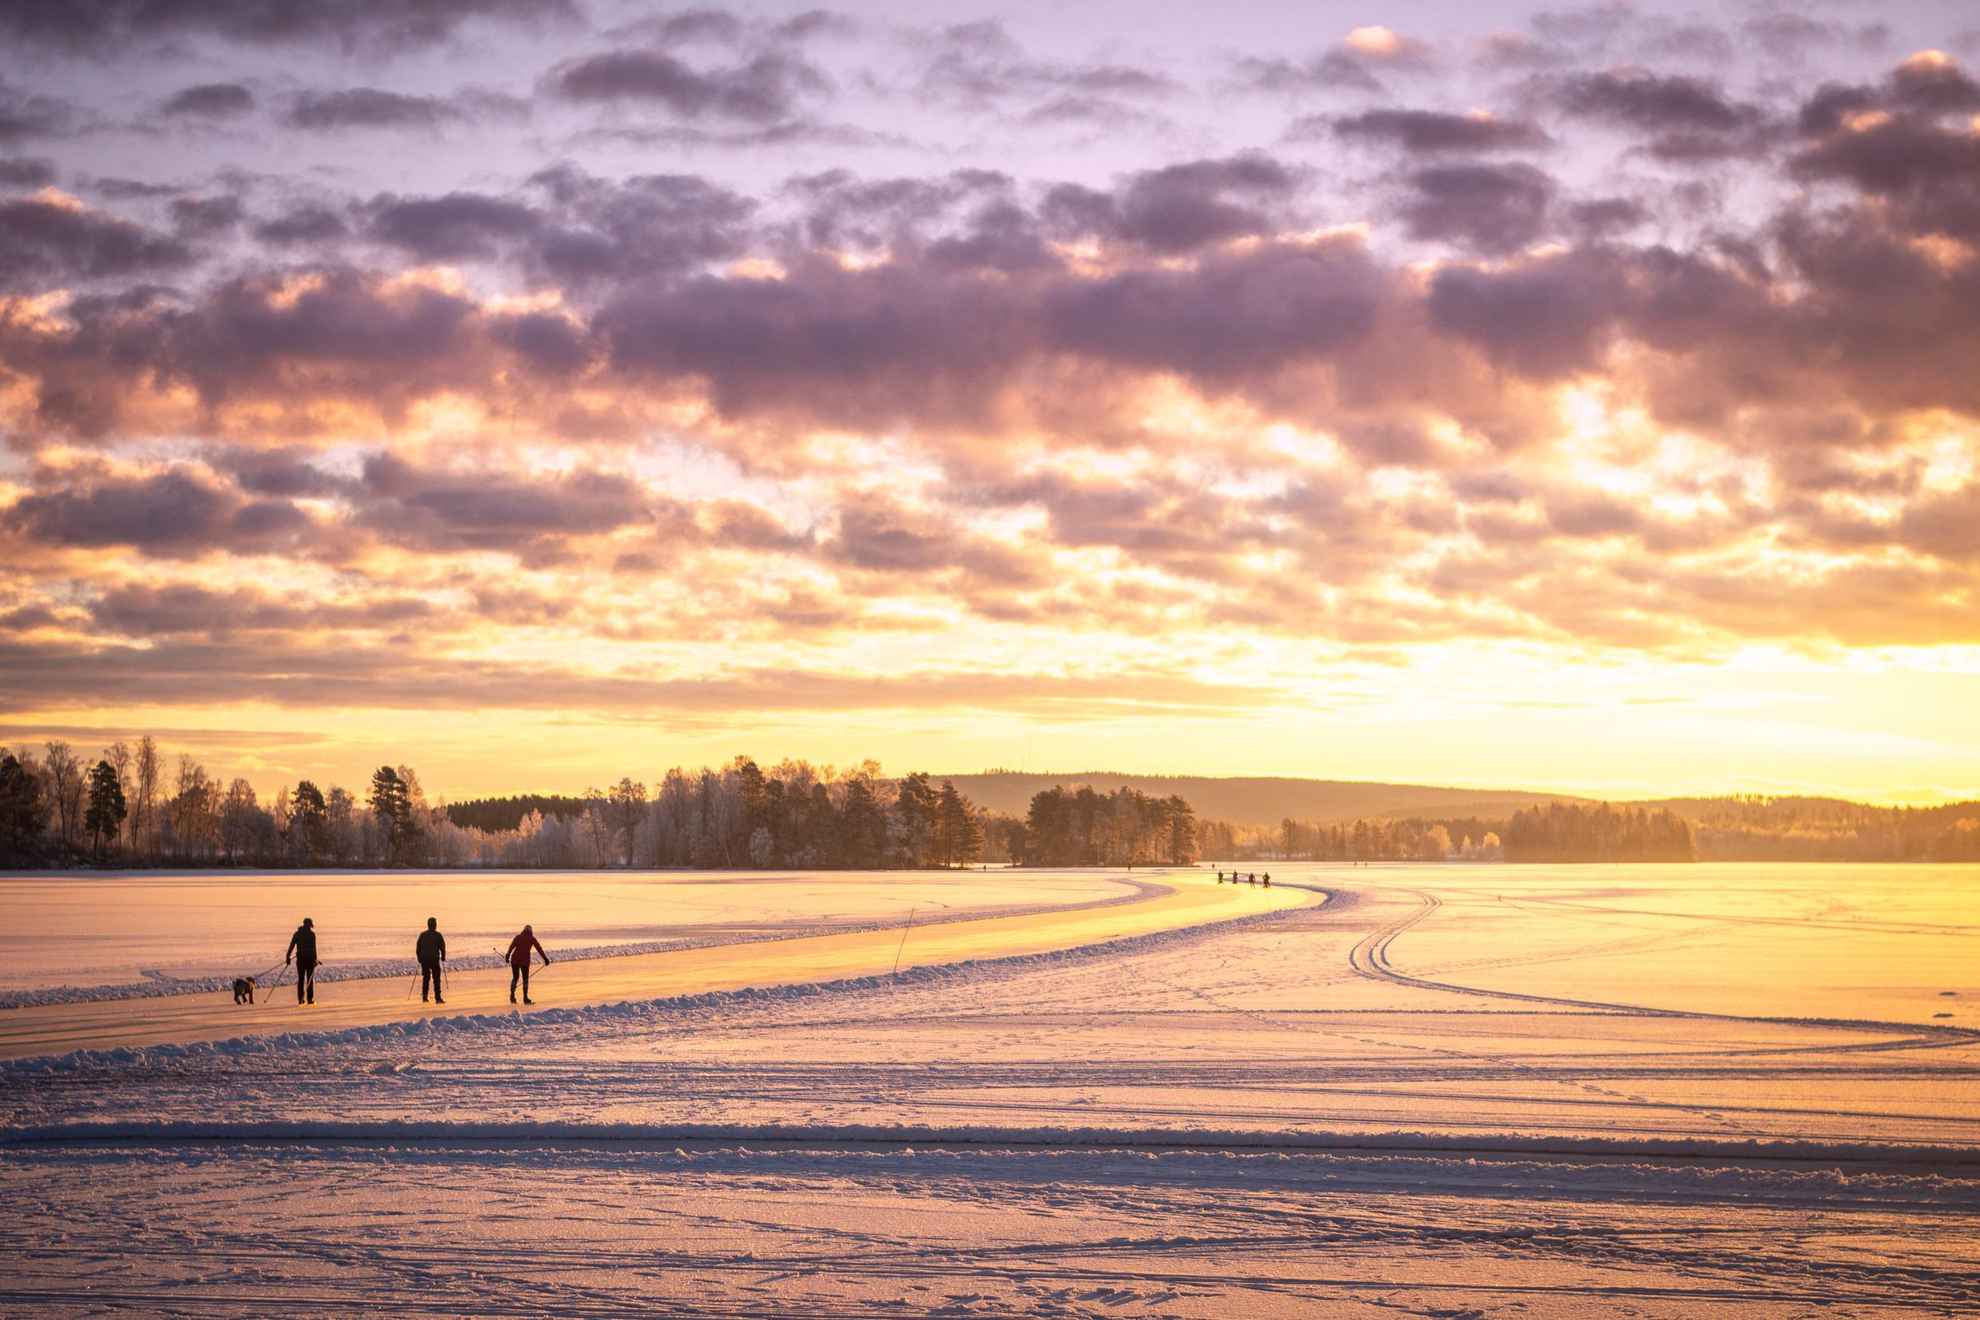 Silhouette of three people skating on a frozen lake. The sun is shining orange.